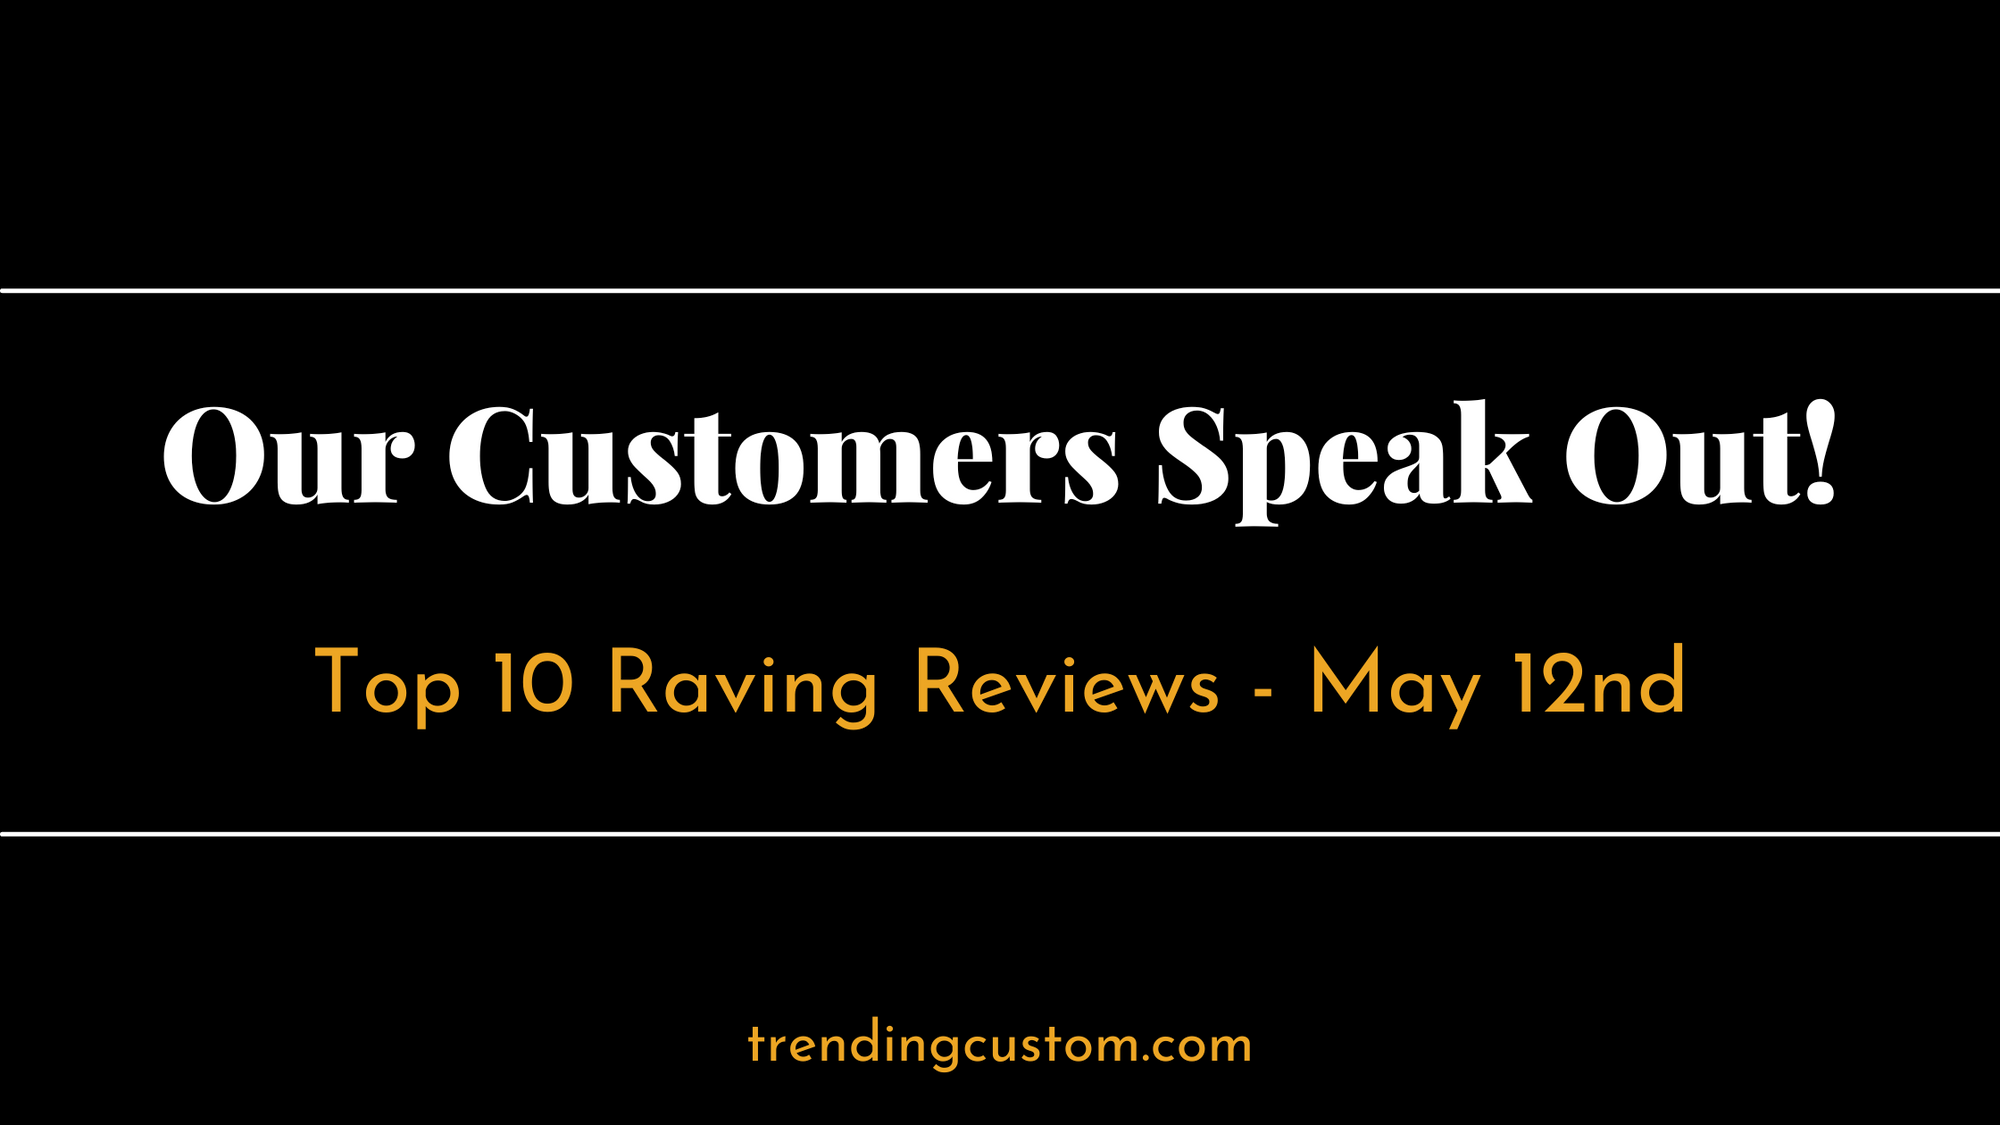 Top 10 Raving Reviews: Our Customers Speak Out! - May 12nd